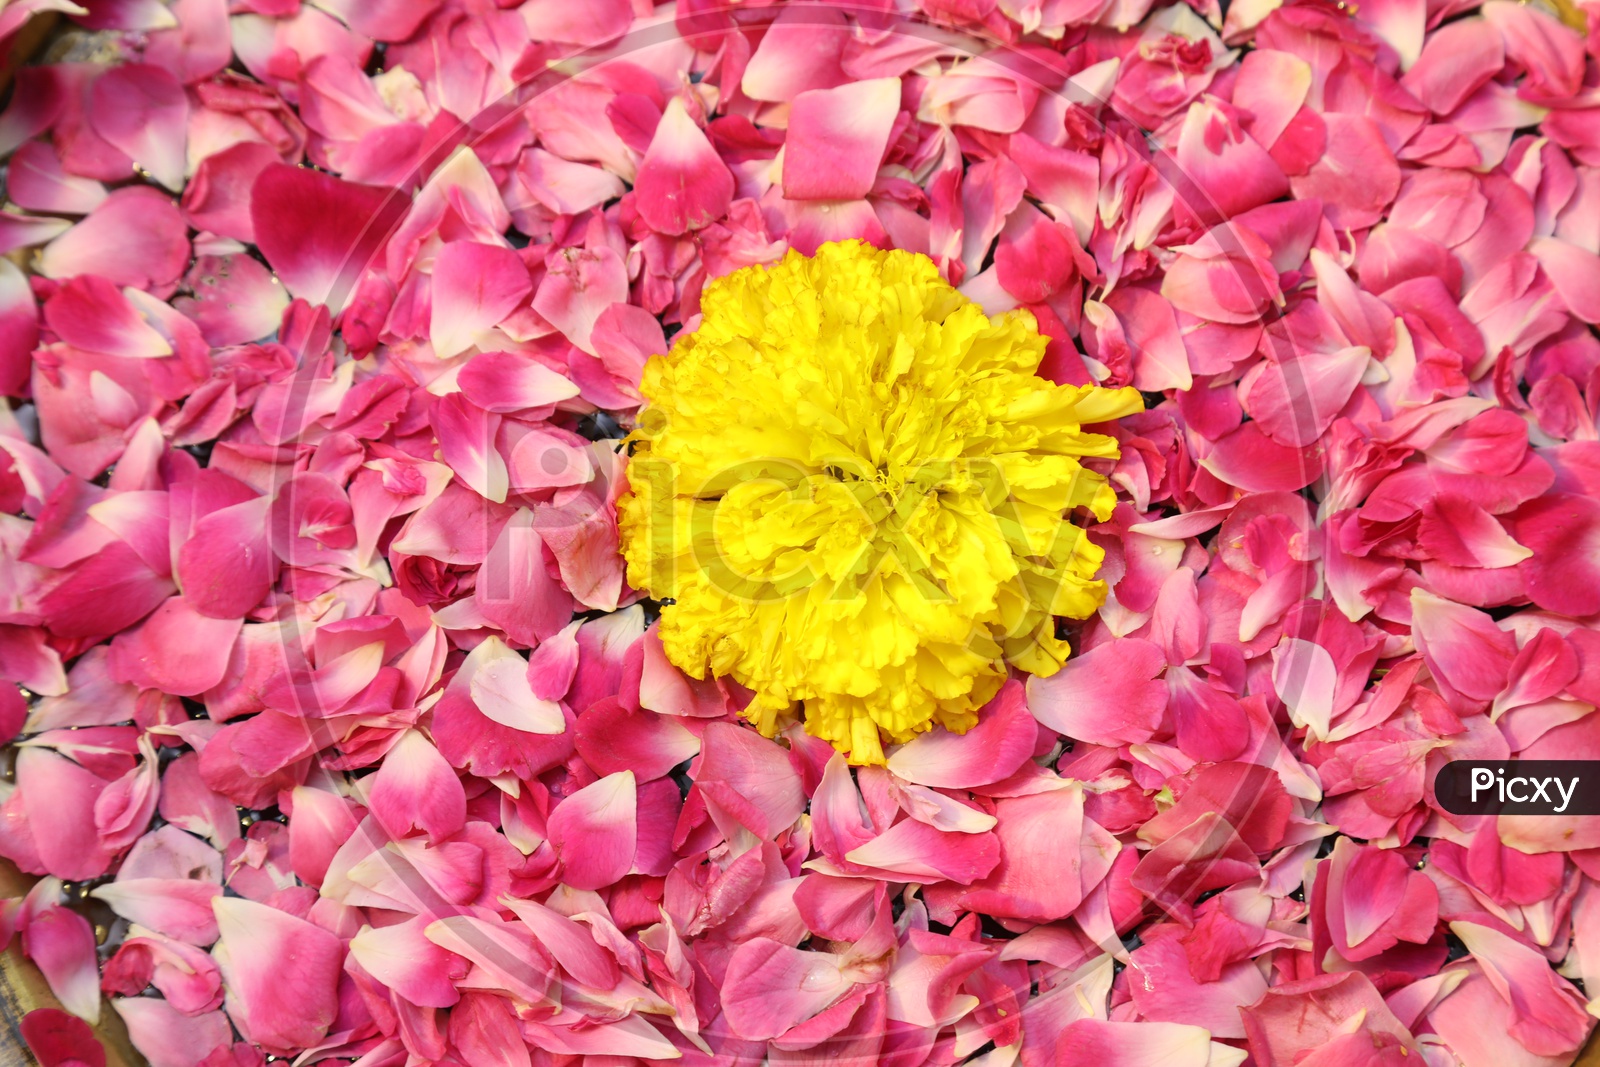 Marigold Flower On a Water Surface With Rose Petals all Around